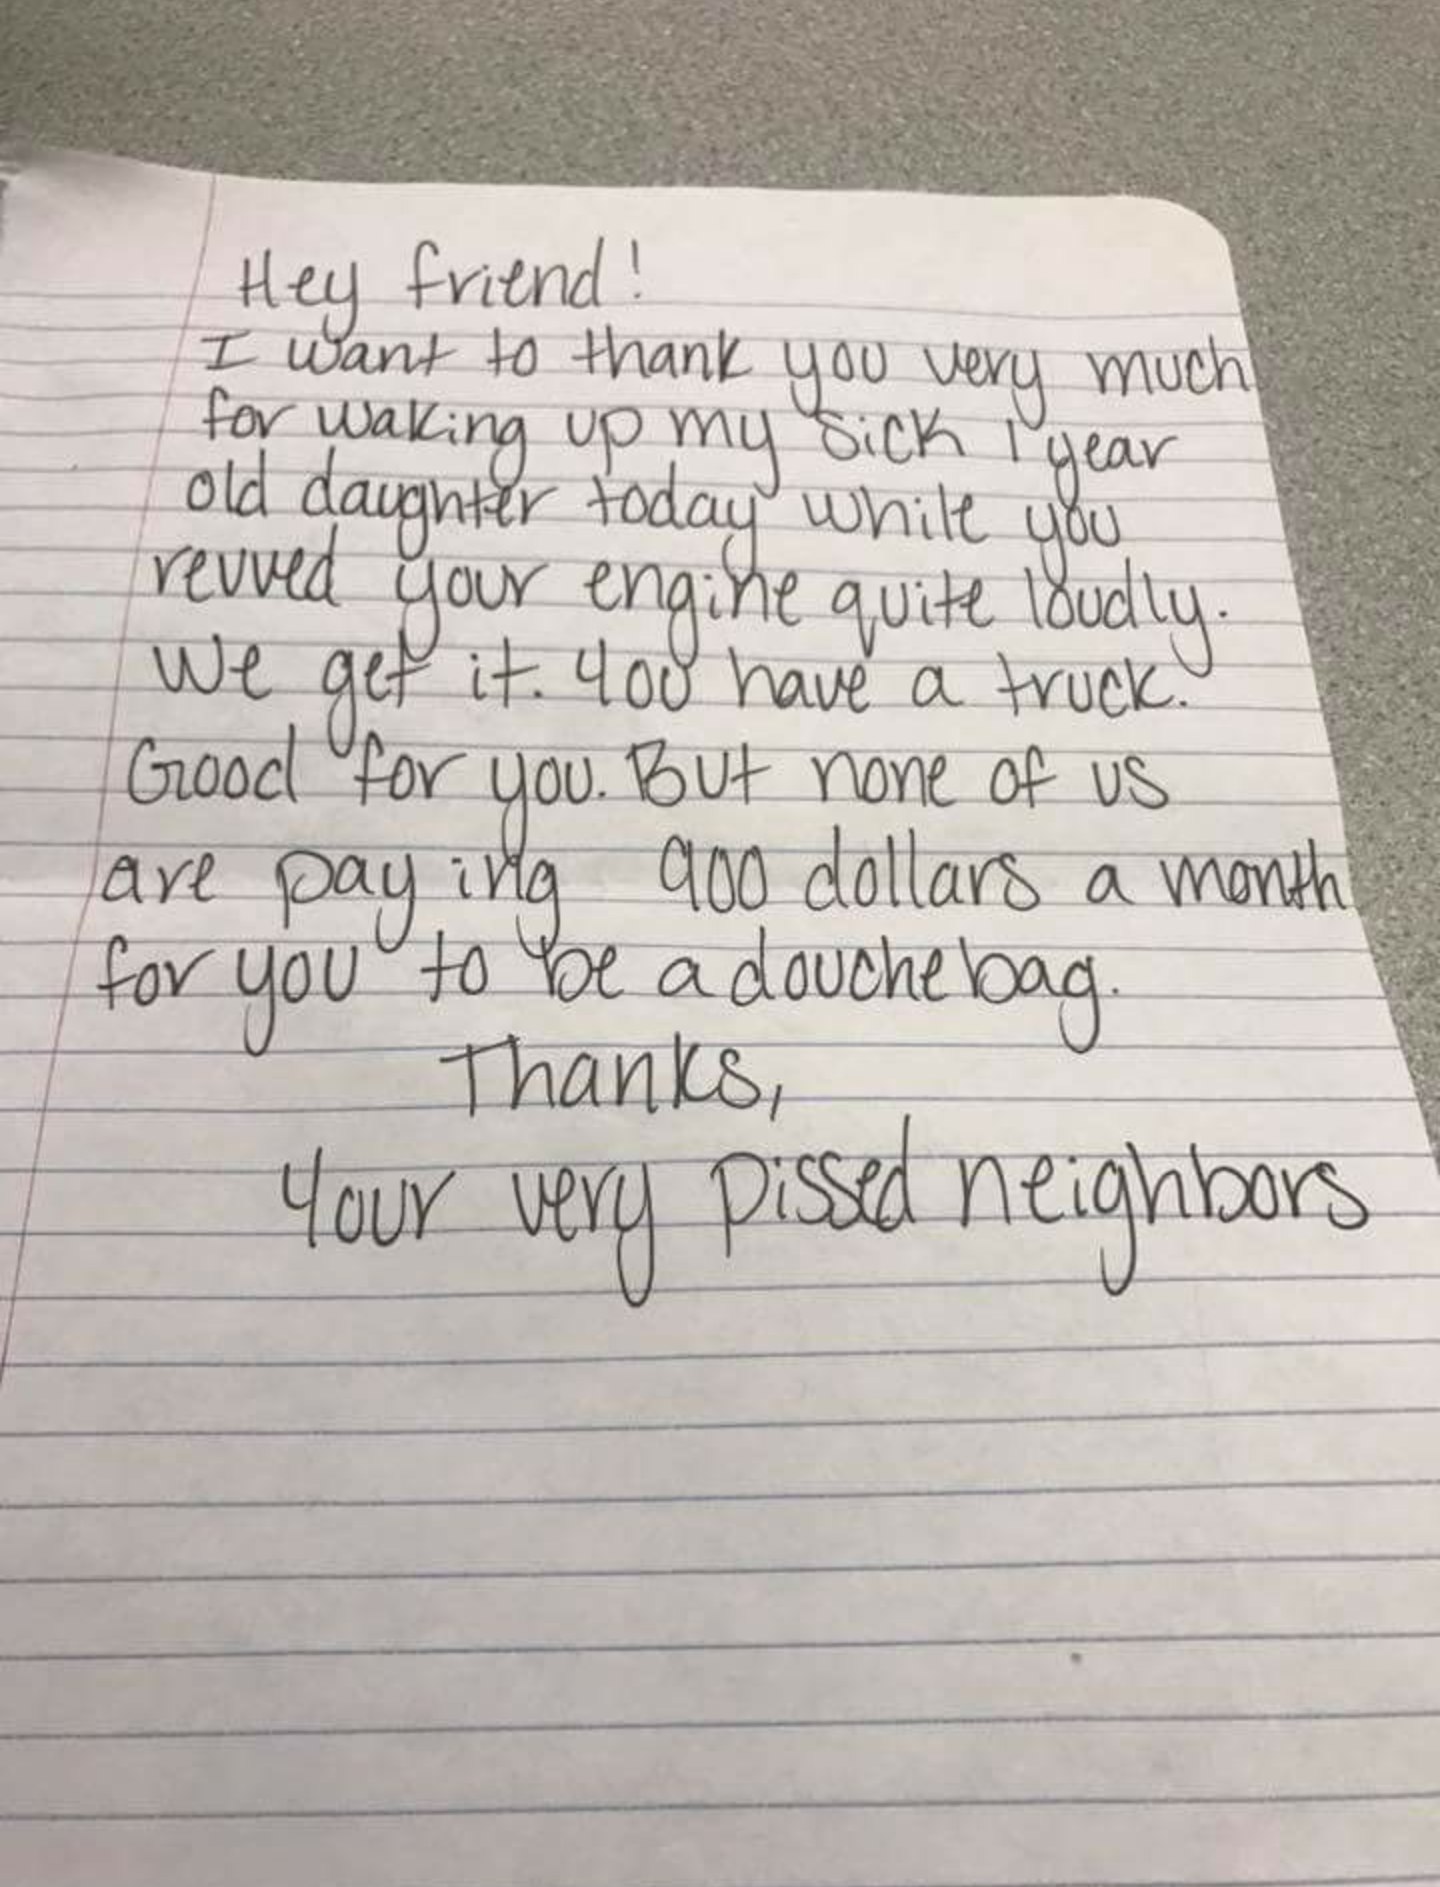 Your Very Pissed Neighbors